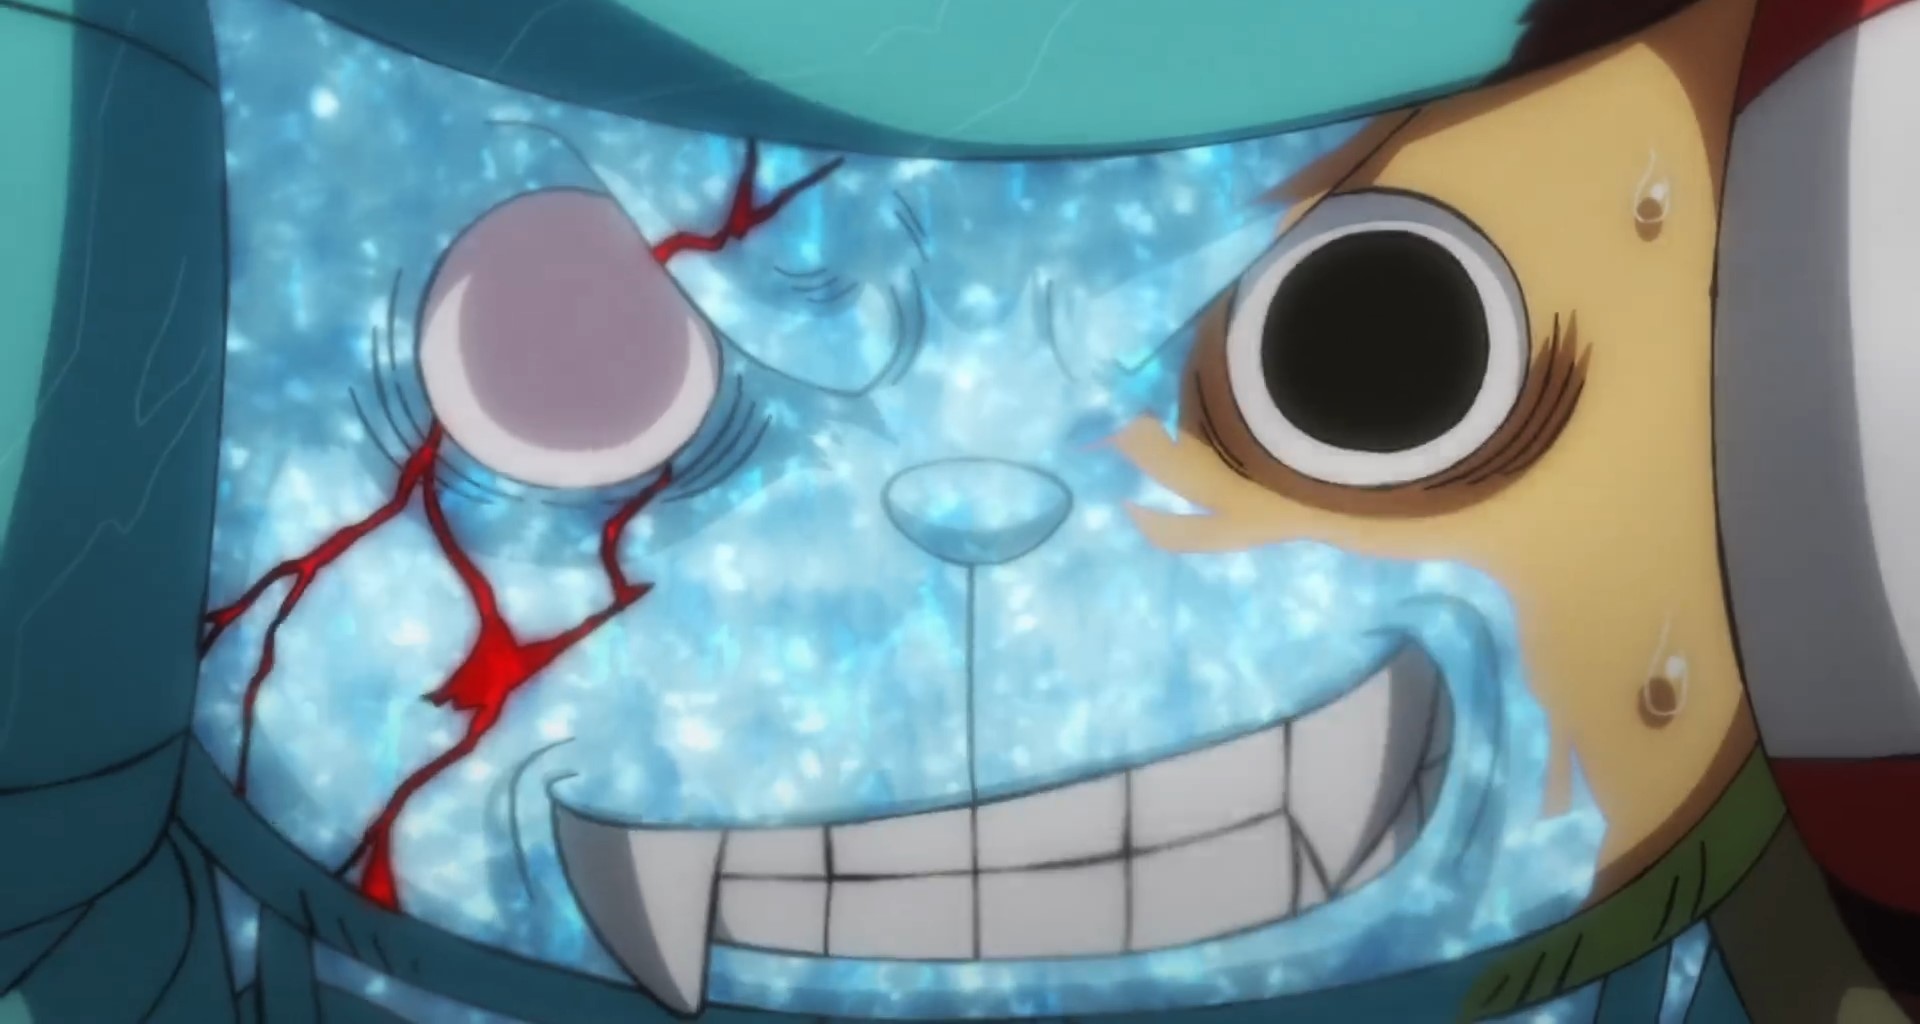 One Piece Episode 1023 Expectations